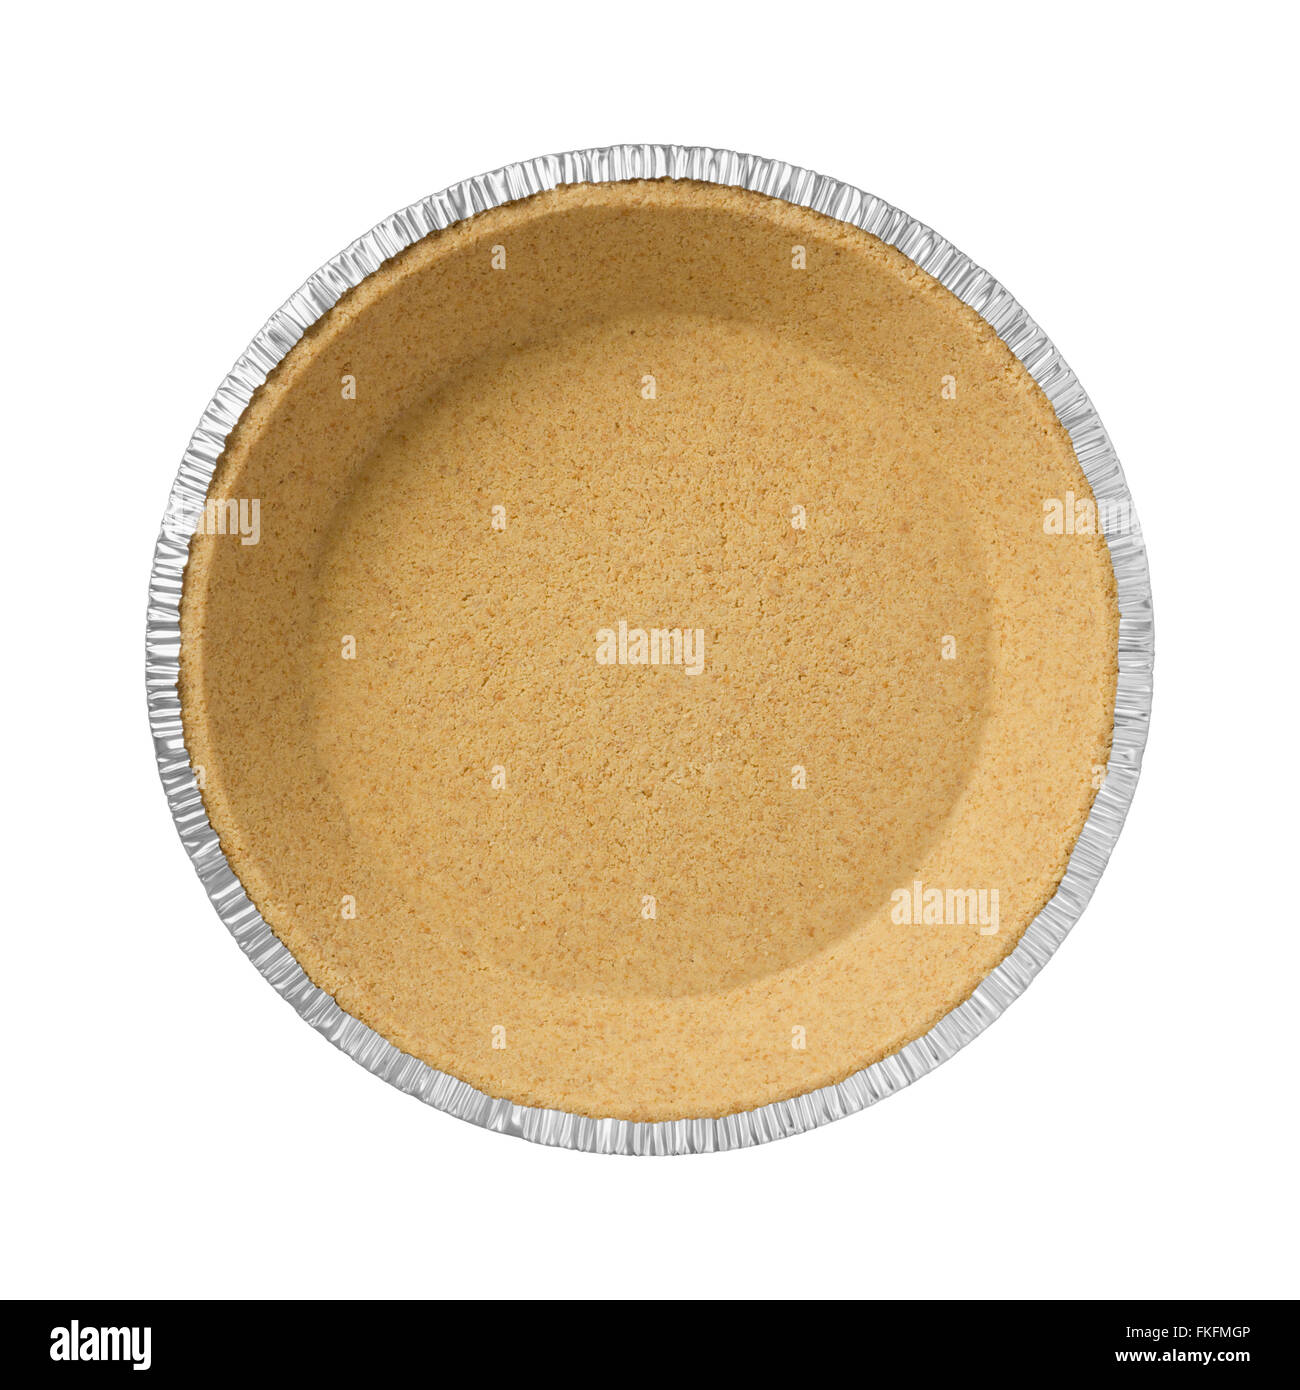 Graham Cracker Pie Crust in a tin dish. The image is a cut out, isolated on a white background. Stock Photo